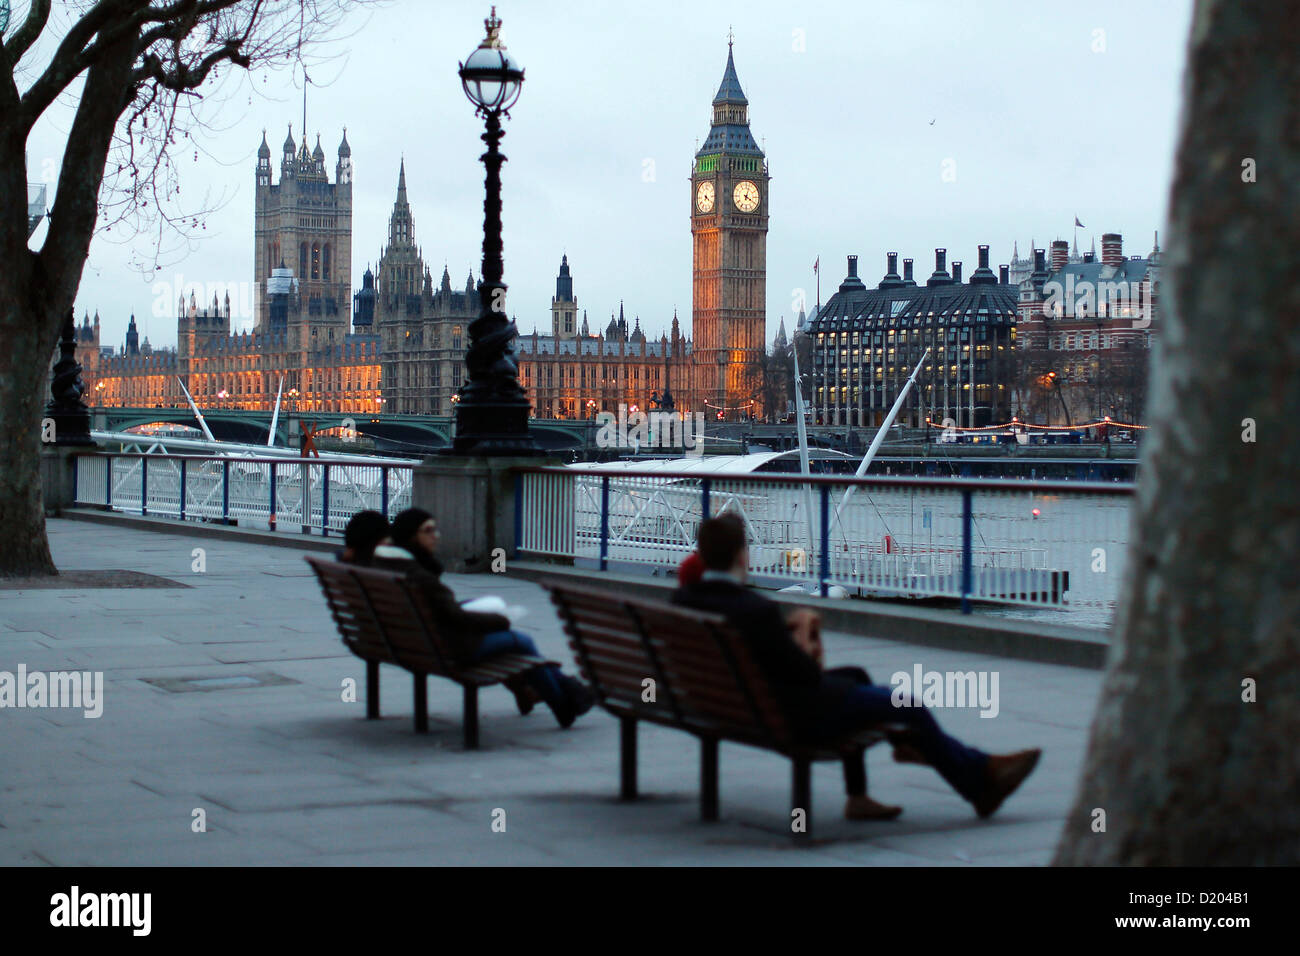 People sit and admire the view on the South Bank near Big Ben and the Houses of Parliament on 07 January 2013 in London. Stock Photo